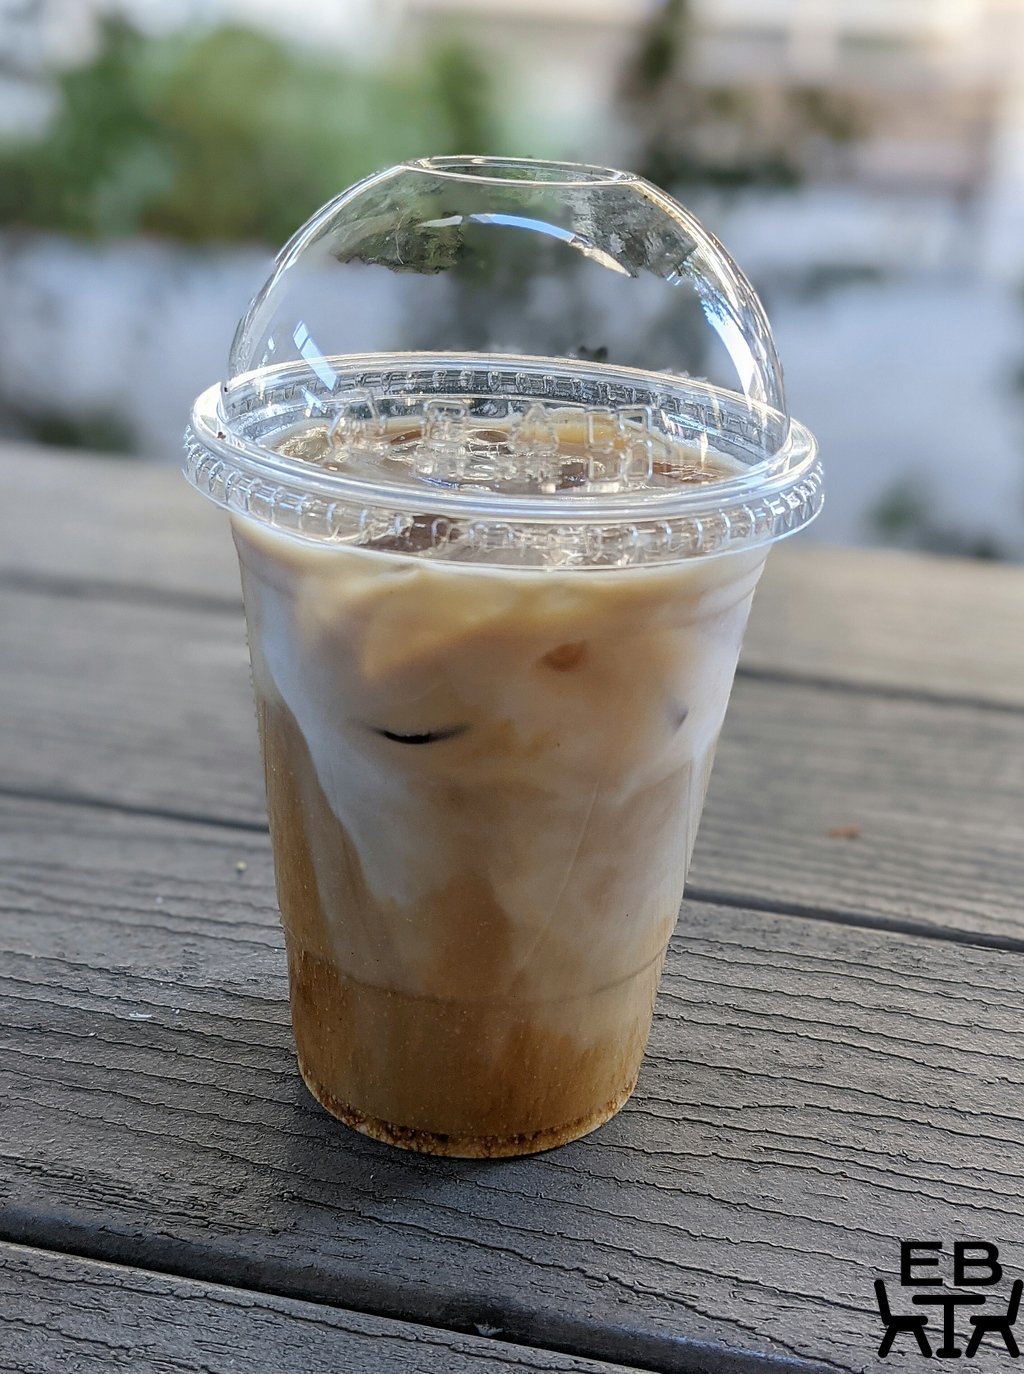 musk cafe and bar iced latte